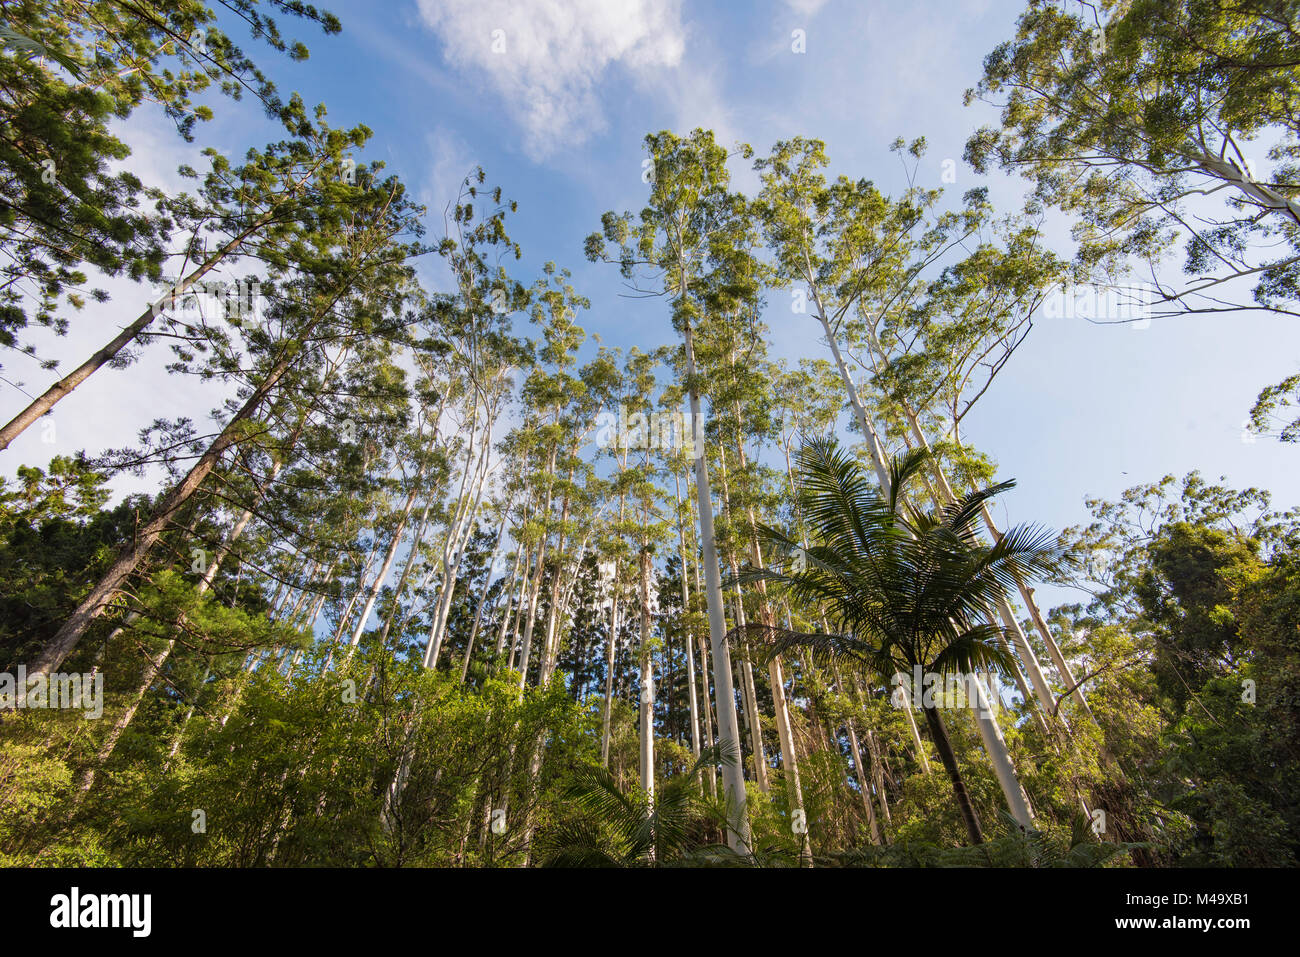 A stand of Eucalyptus grandis also known as the flooded gum or rose gum trees in Northern NSW, Australia Stock Photo